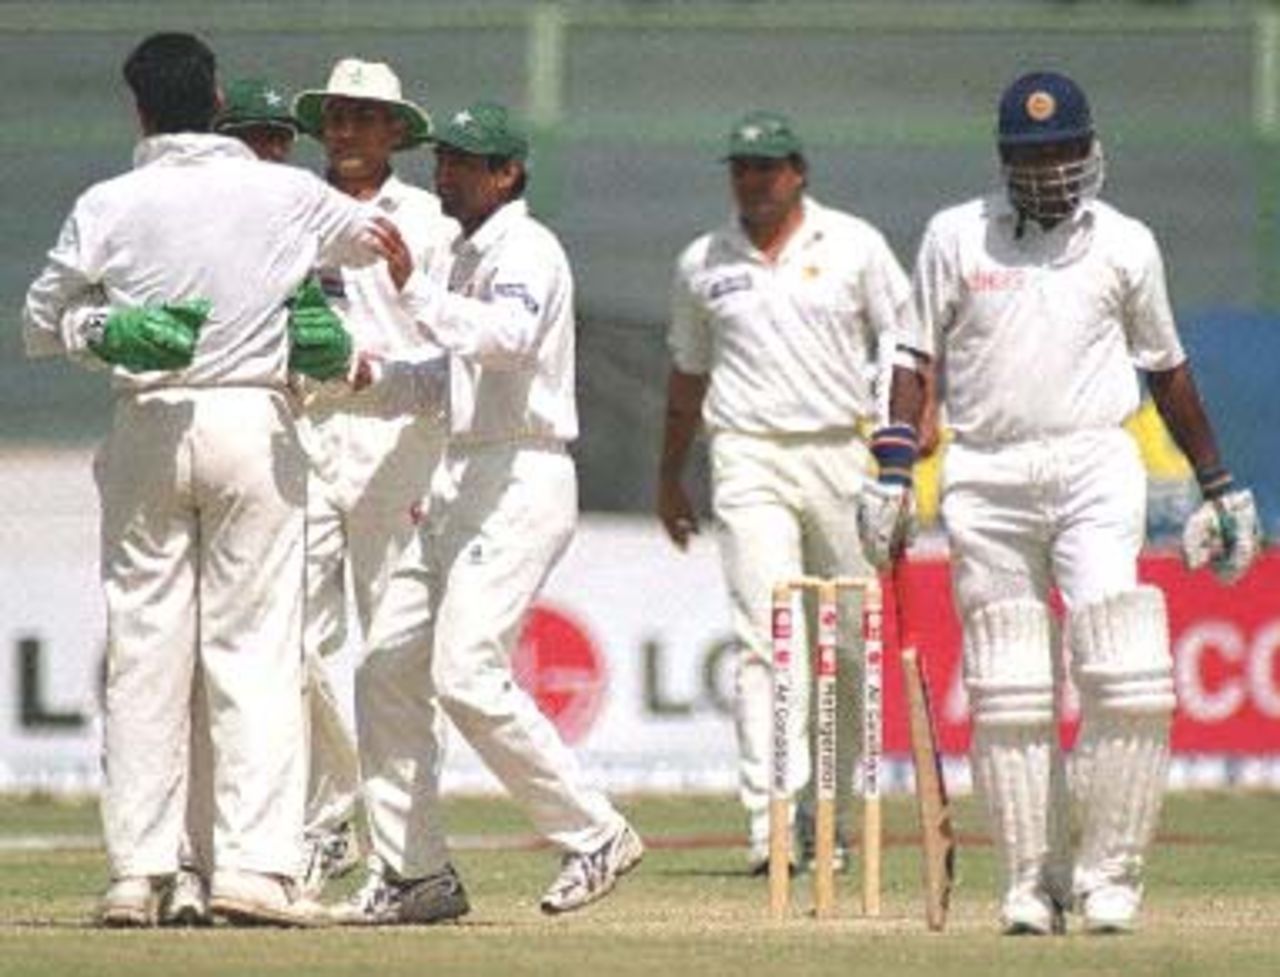 Members of the Pakistani team embrace their pacer Waqar Younis (L) as Sri Lankan skipper Sanath Jayasuriya (R) leaves the ground on the fourth day of the third and final cricket Test in Karachi, 15 March 2000. Jayasuriya was judged leg before wicket off Younis for 10. Sri Lanka were struggling at 127-6 at tea in reply of Pakistan's 450 runs lead.